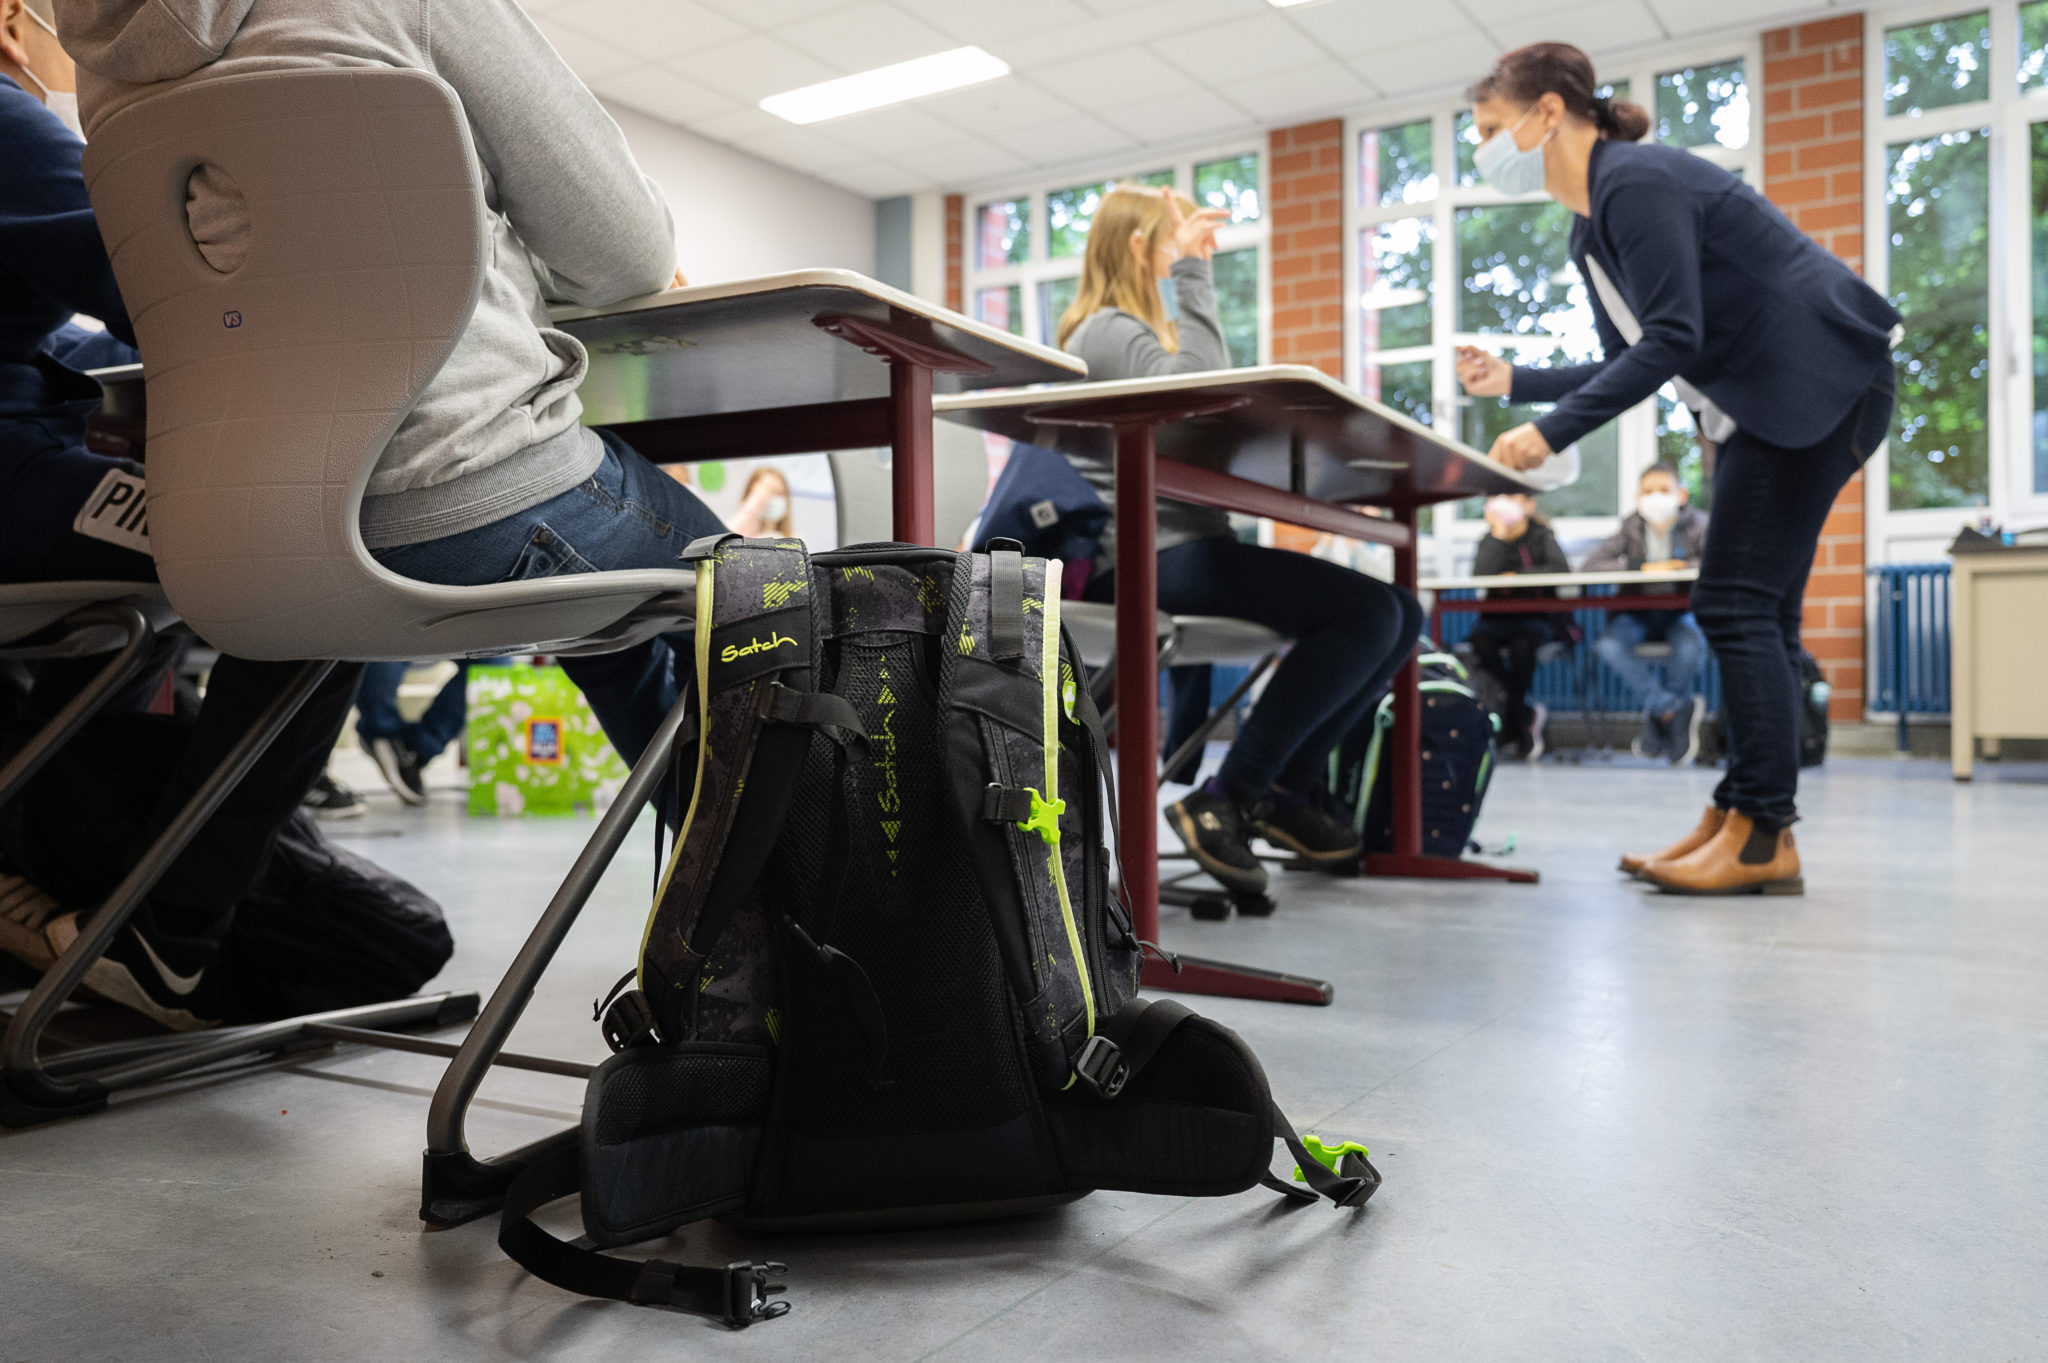 A backpack stands next to a student's chair in a classroom during the enrollment of a fifth grade class in Germany in August 2021